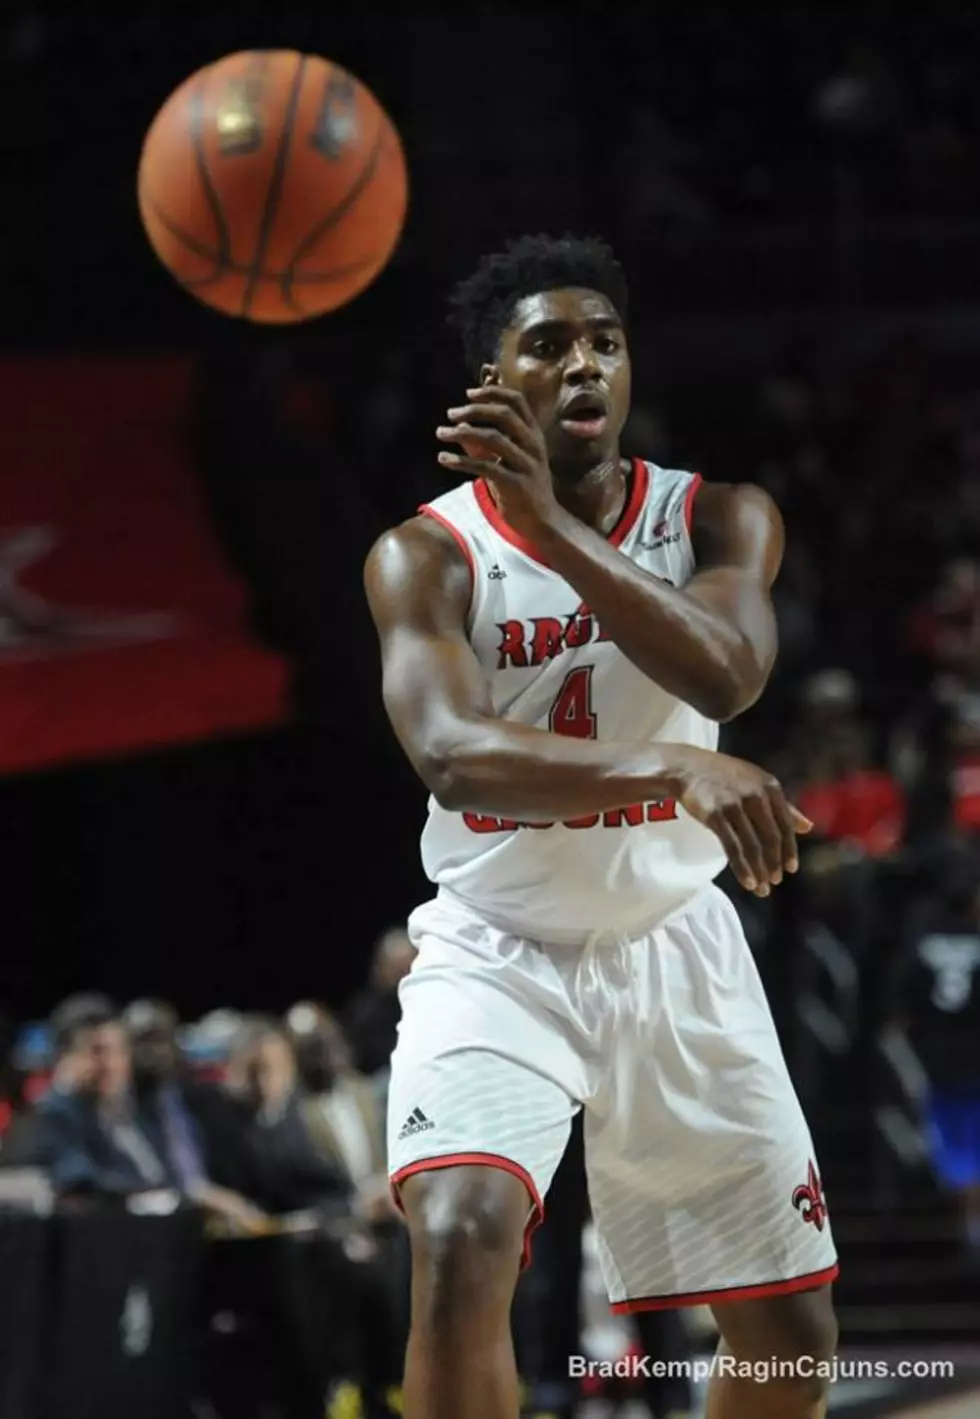 Cajuns Top Arkansas State for Record 26th Win